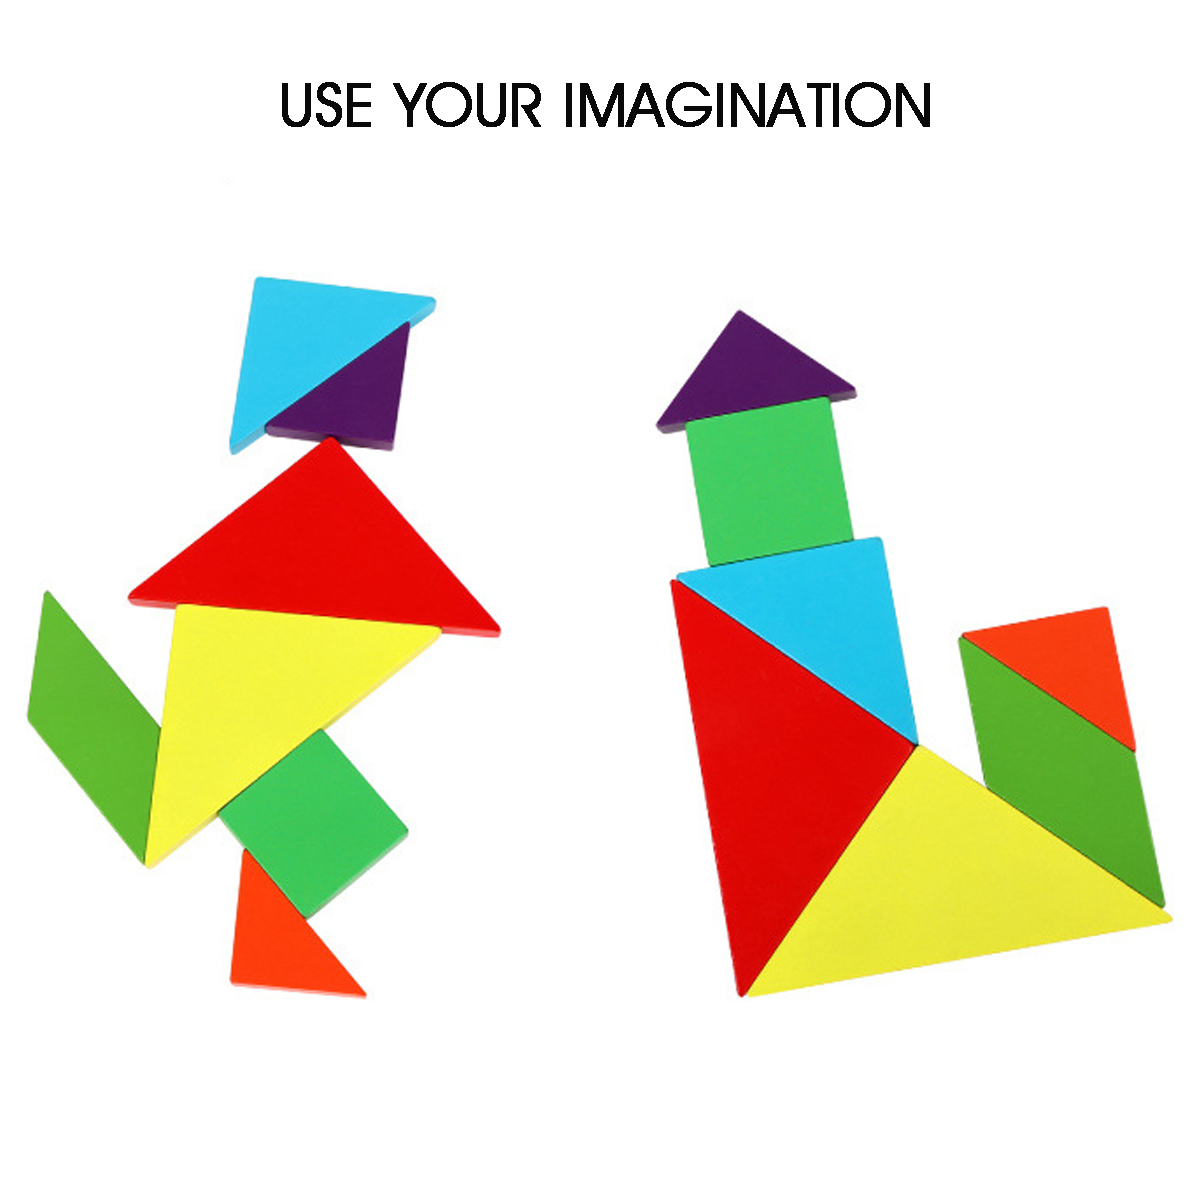 Kids-Child-Magnetic-Tangram-Jigsaw-Puzzle-Toy-Creative-Shape-DIY-Wooden-Puzzles-Montessori-1621514-4